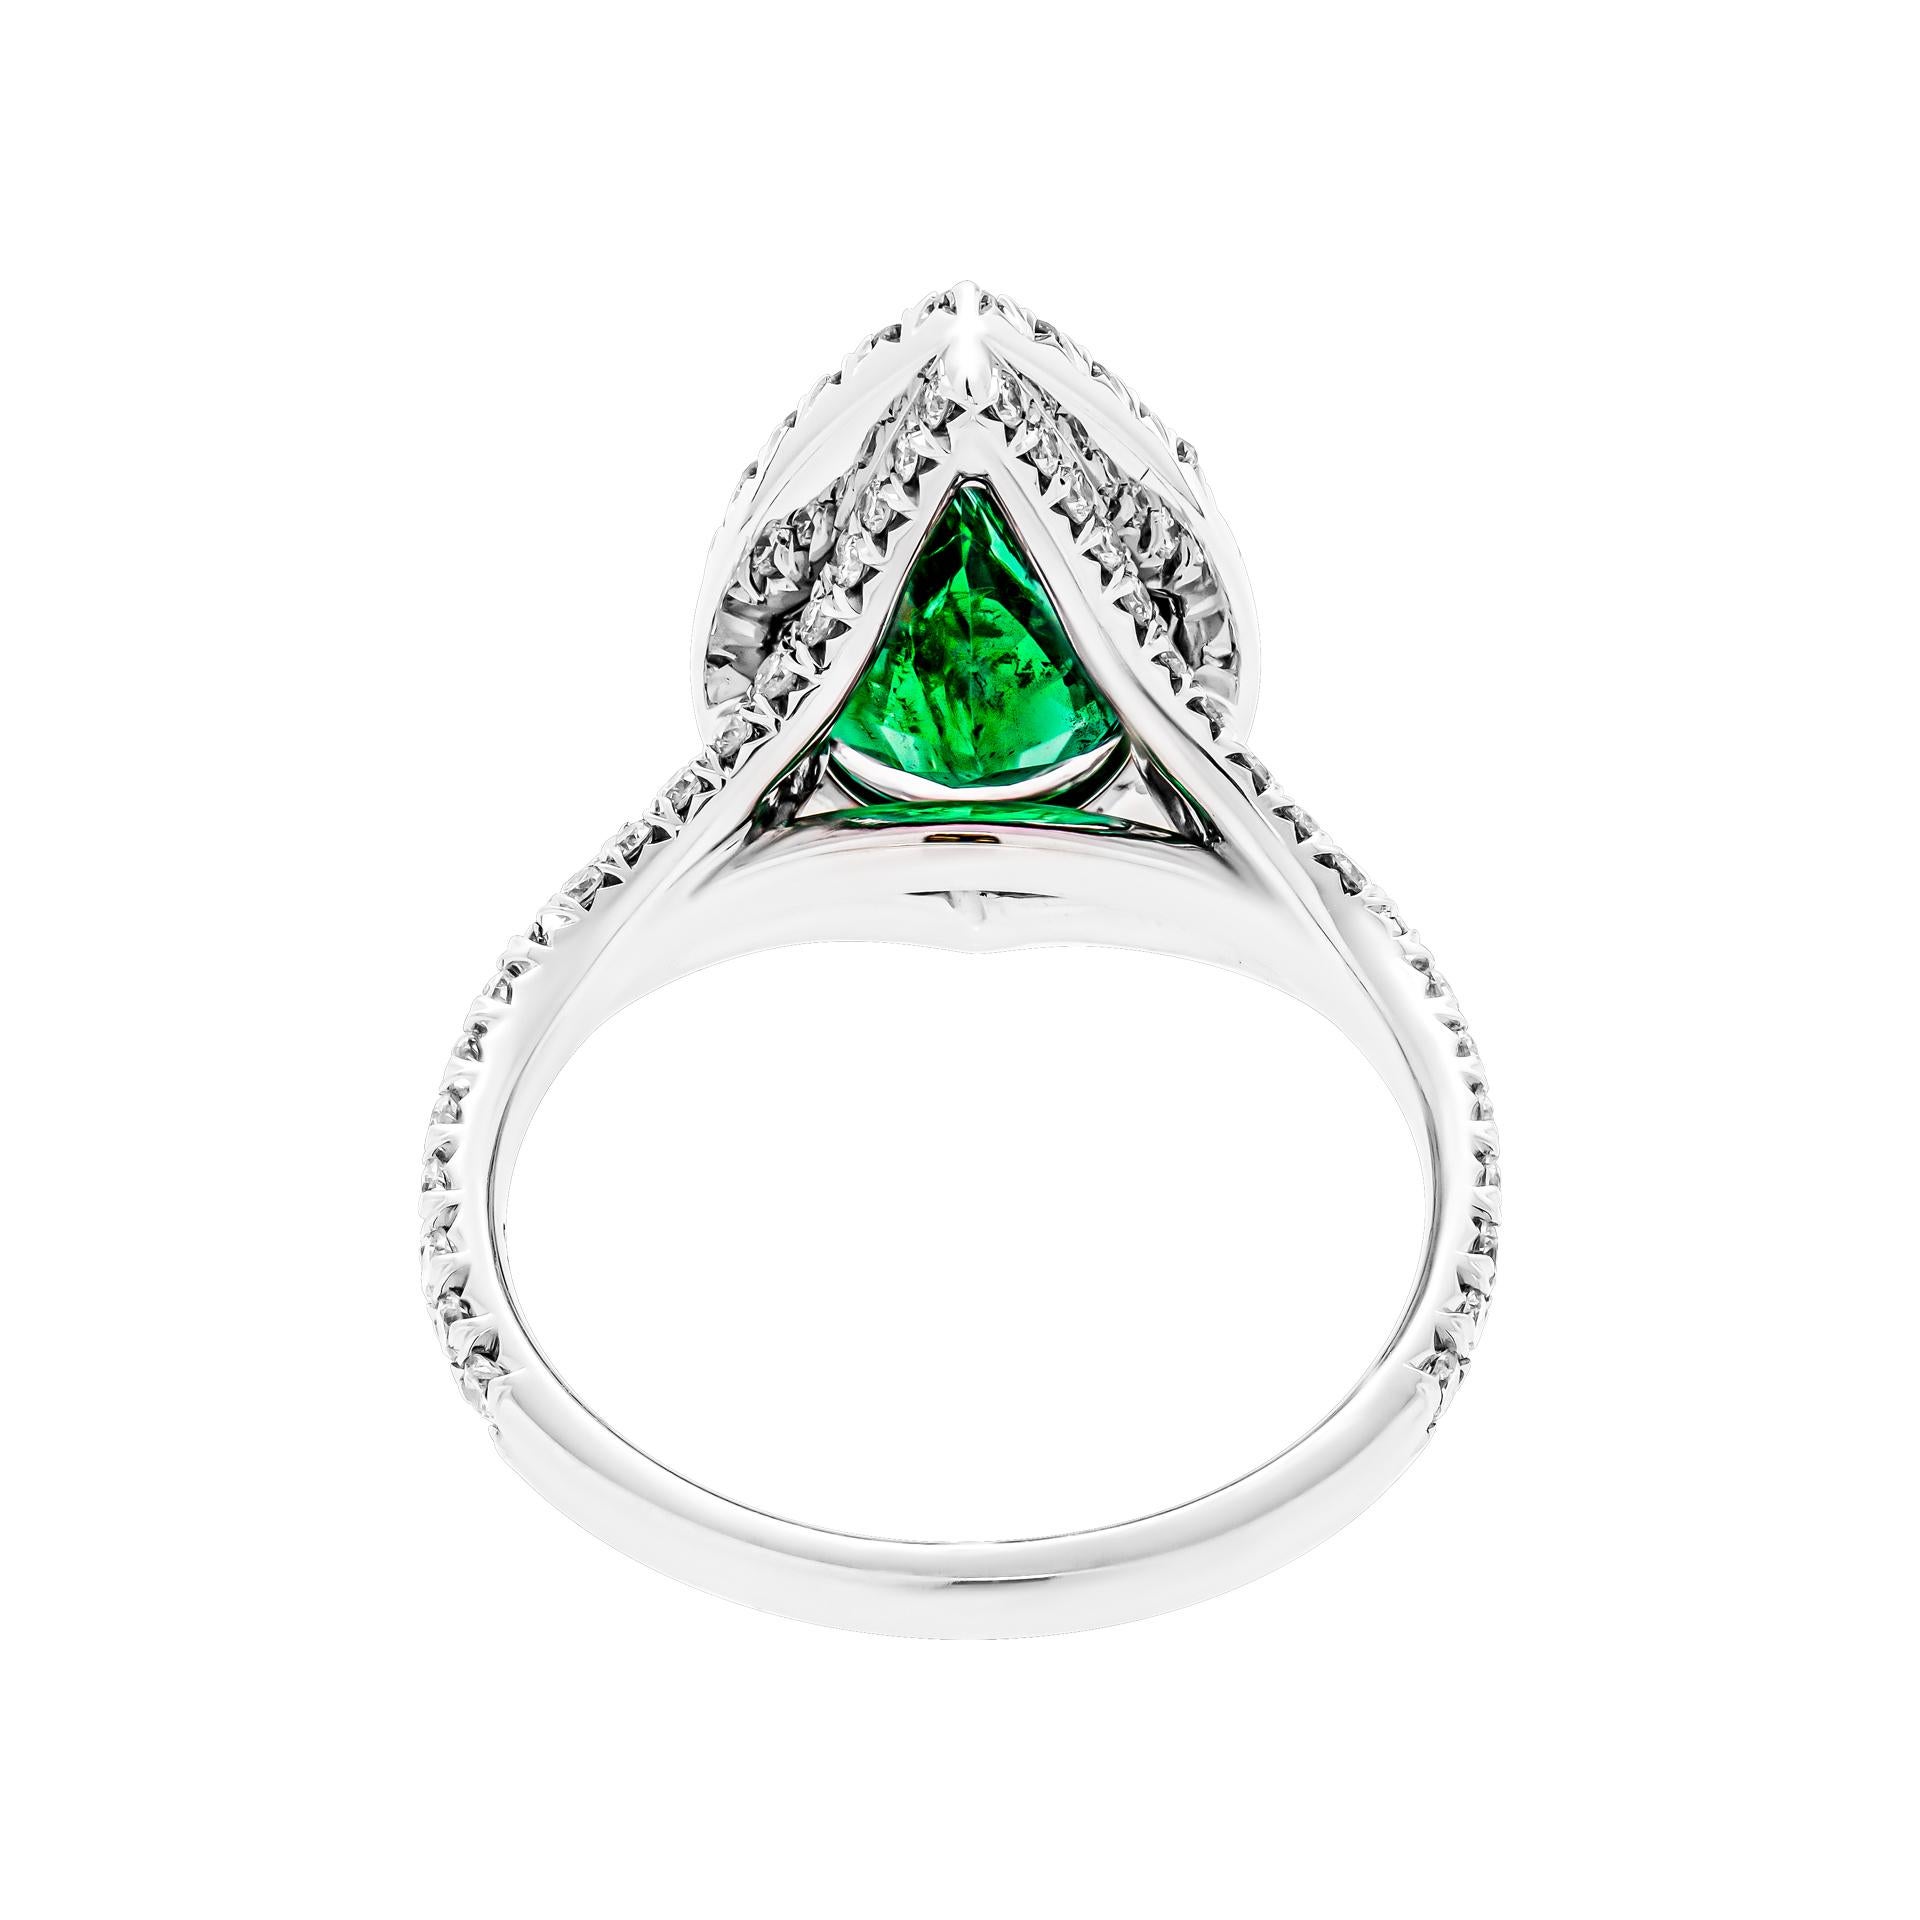 Modern Cocktail Ring with 2.16 Carat Green Emerald Pear Shape For Sale